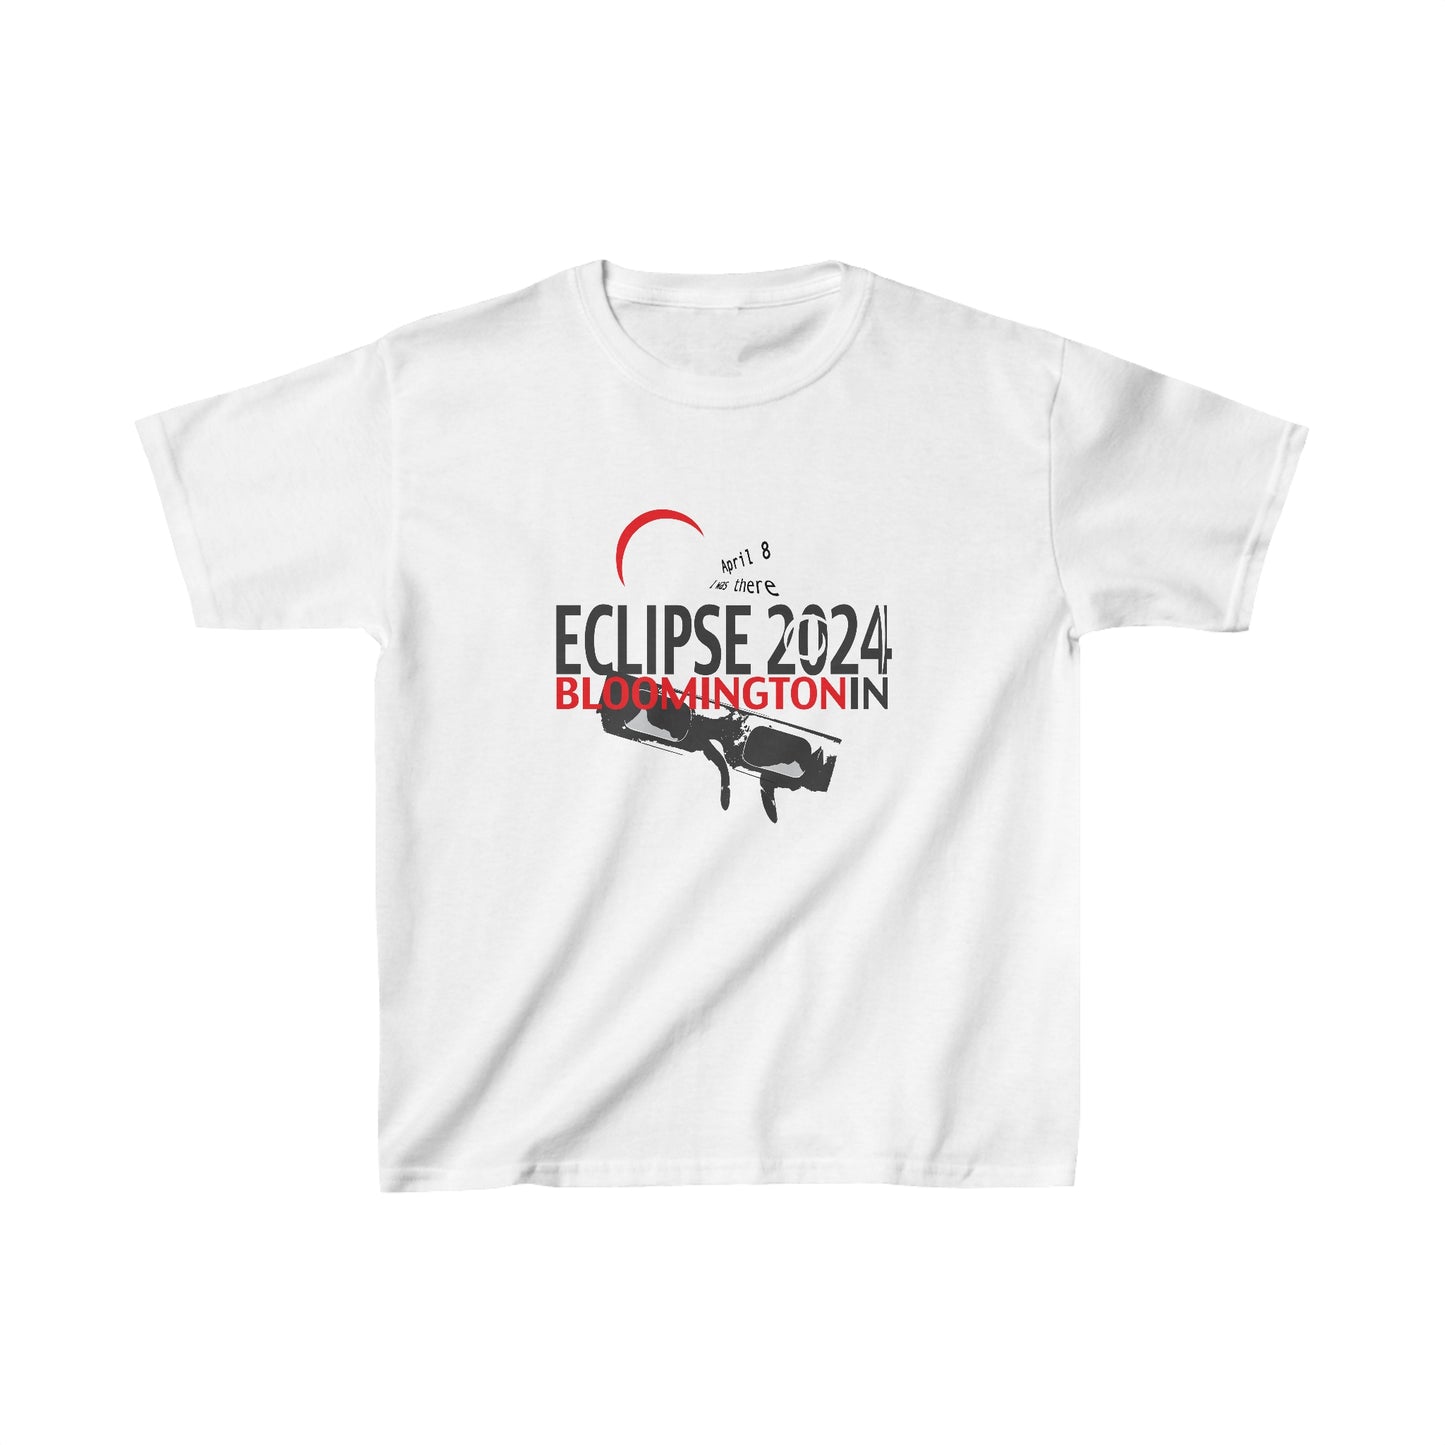 Eclipse Design Youth Tee (Eclipse Glasses Design #1)